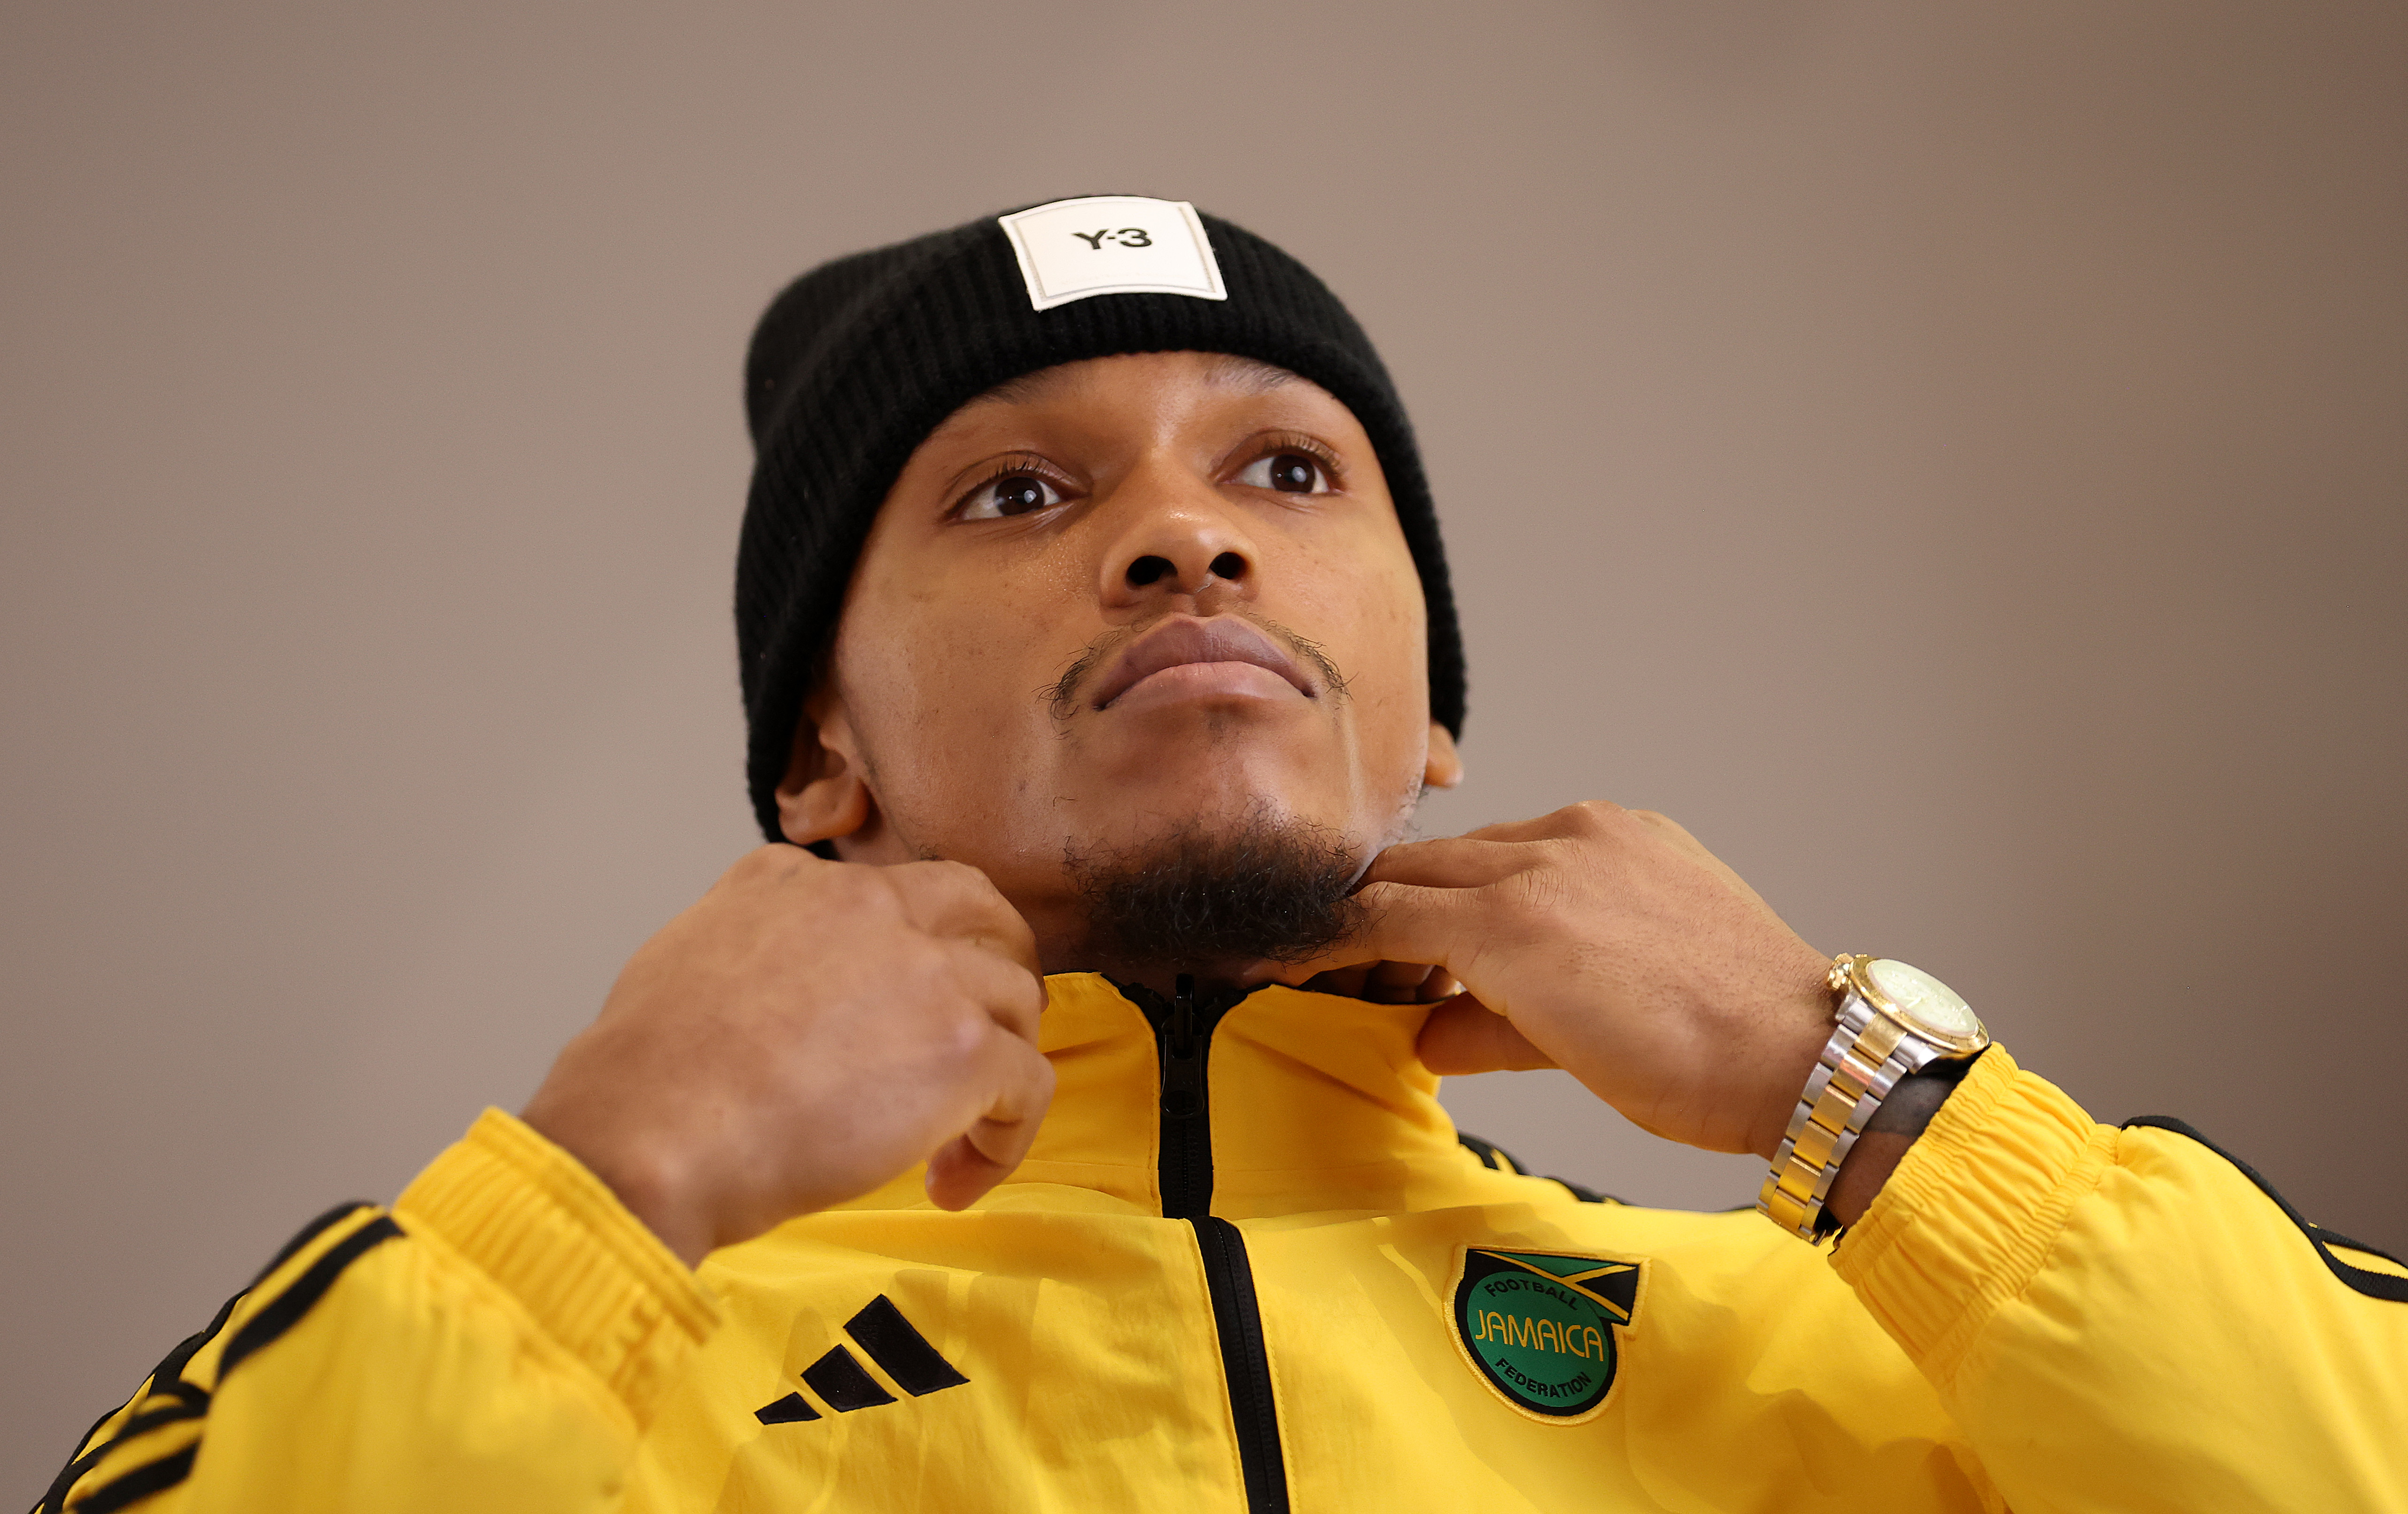 Anthony Yarde has to walk through fire if he is to beat Artur Beterbiev on Saturday